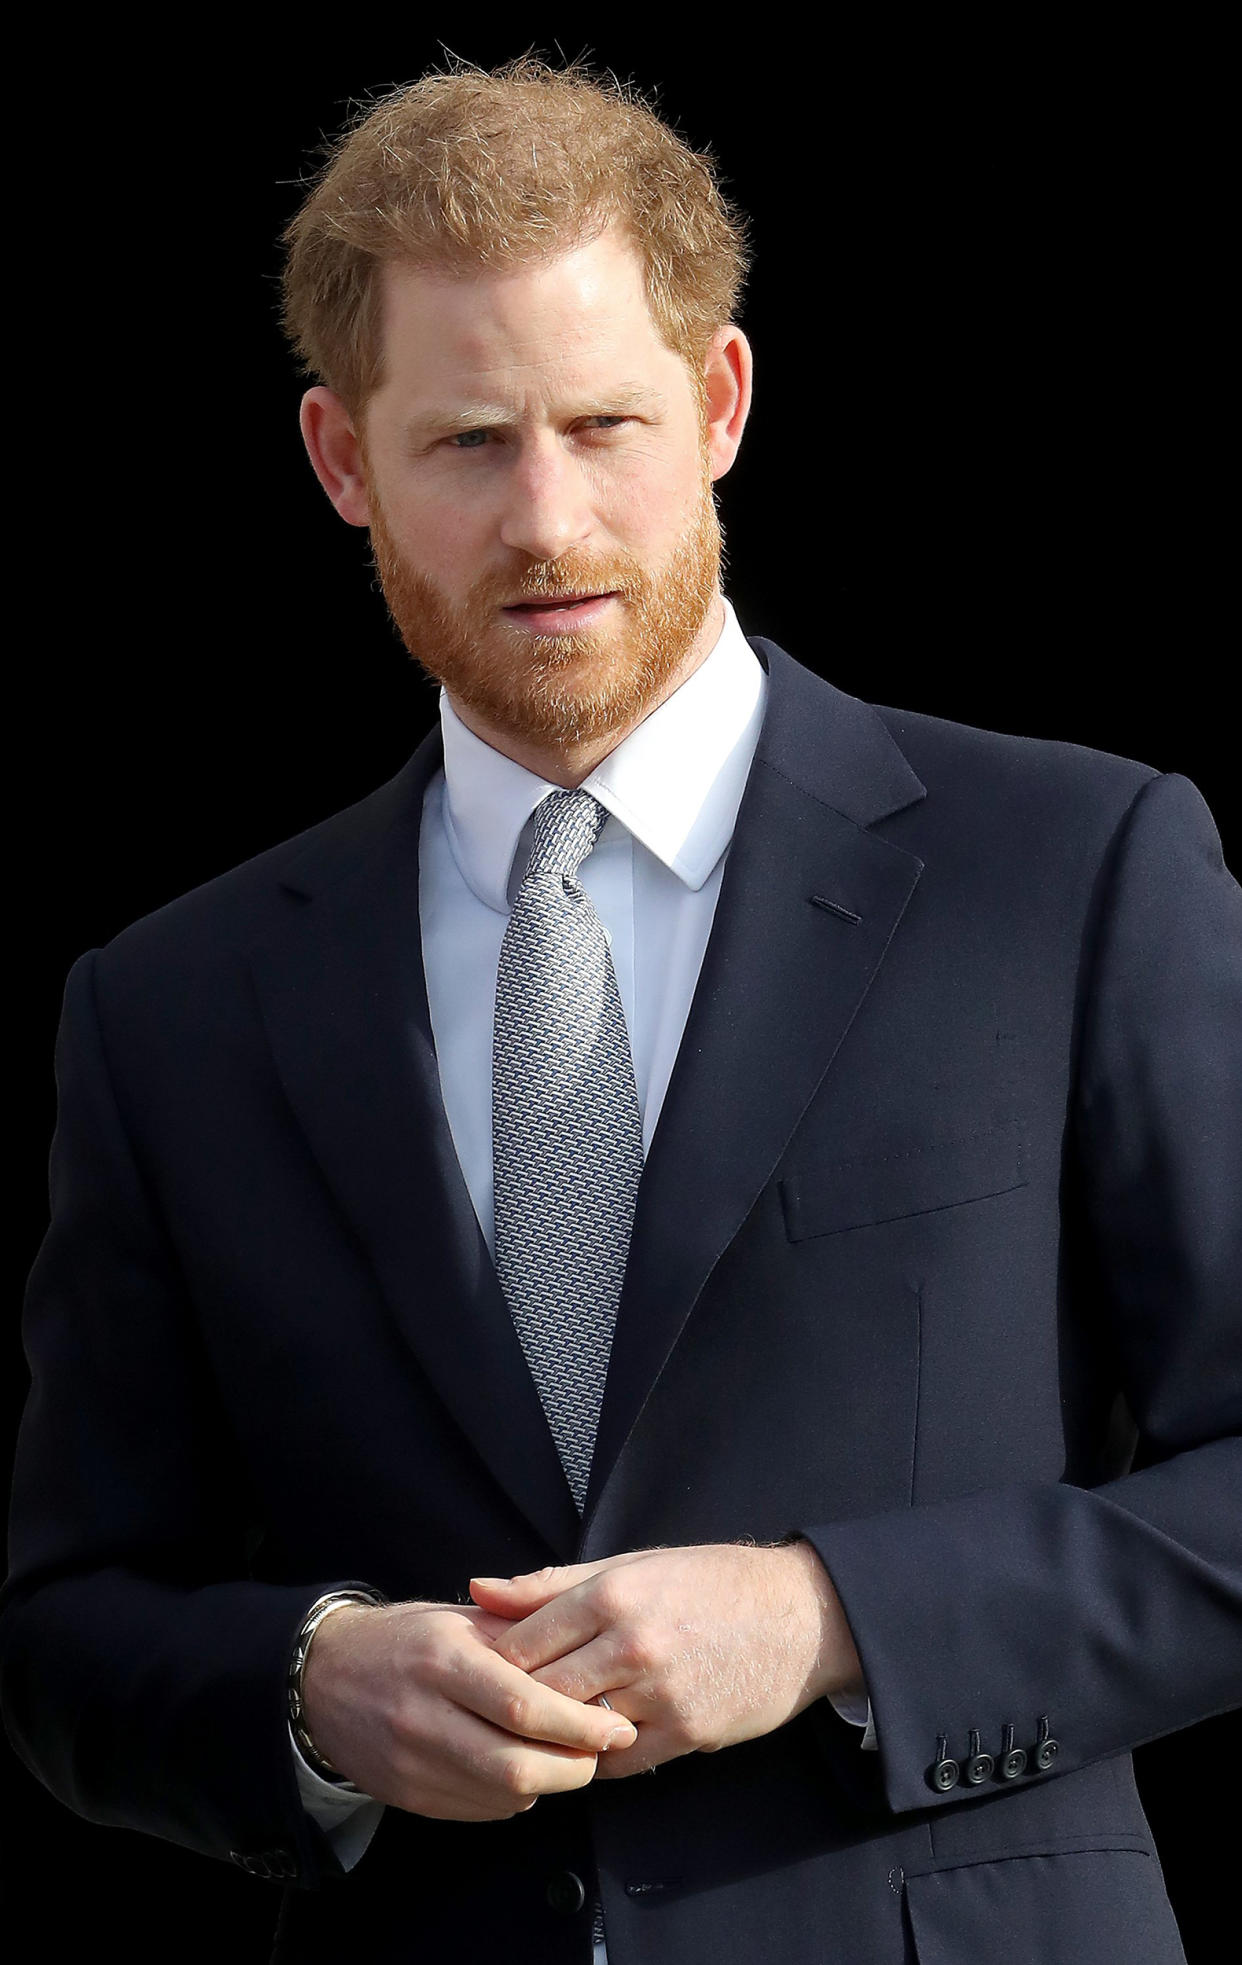 Image: The Duke Of Sussex Hosts The Rugby League World Cup 2021 Draws (Chris Jackson / Getty Images)